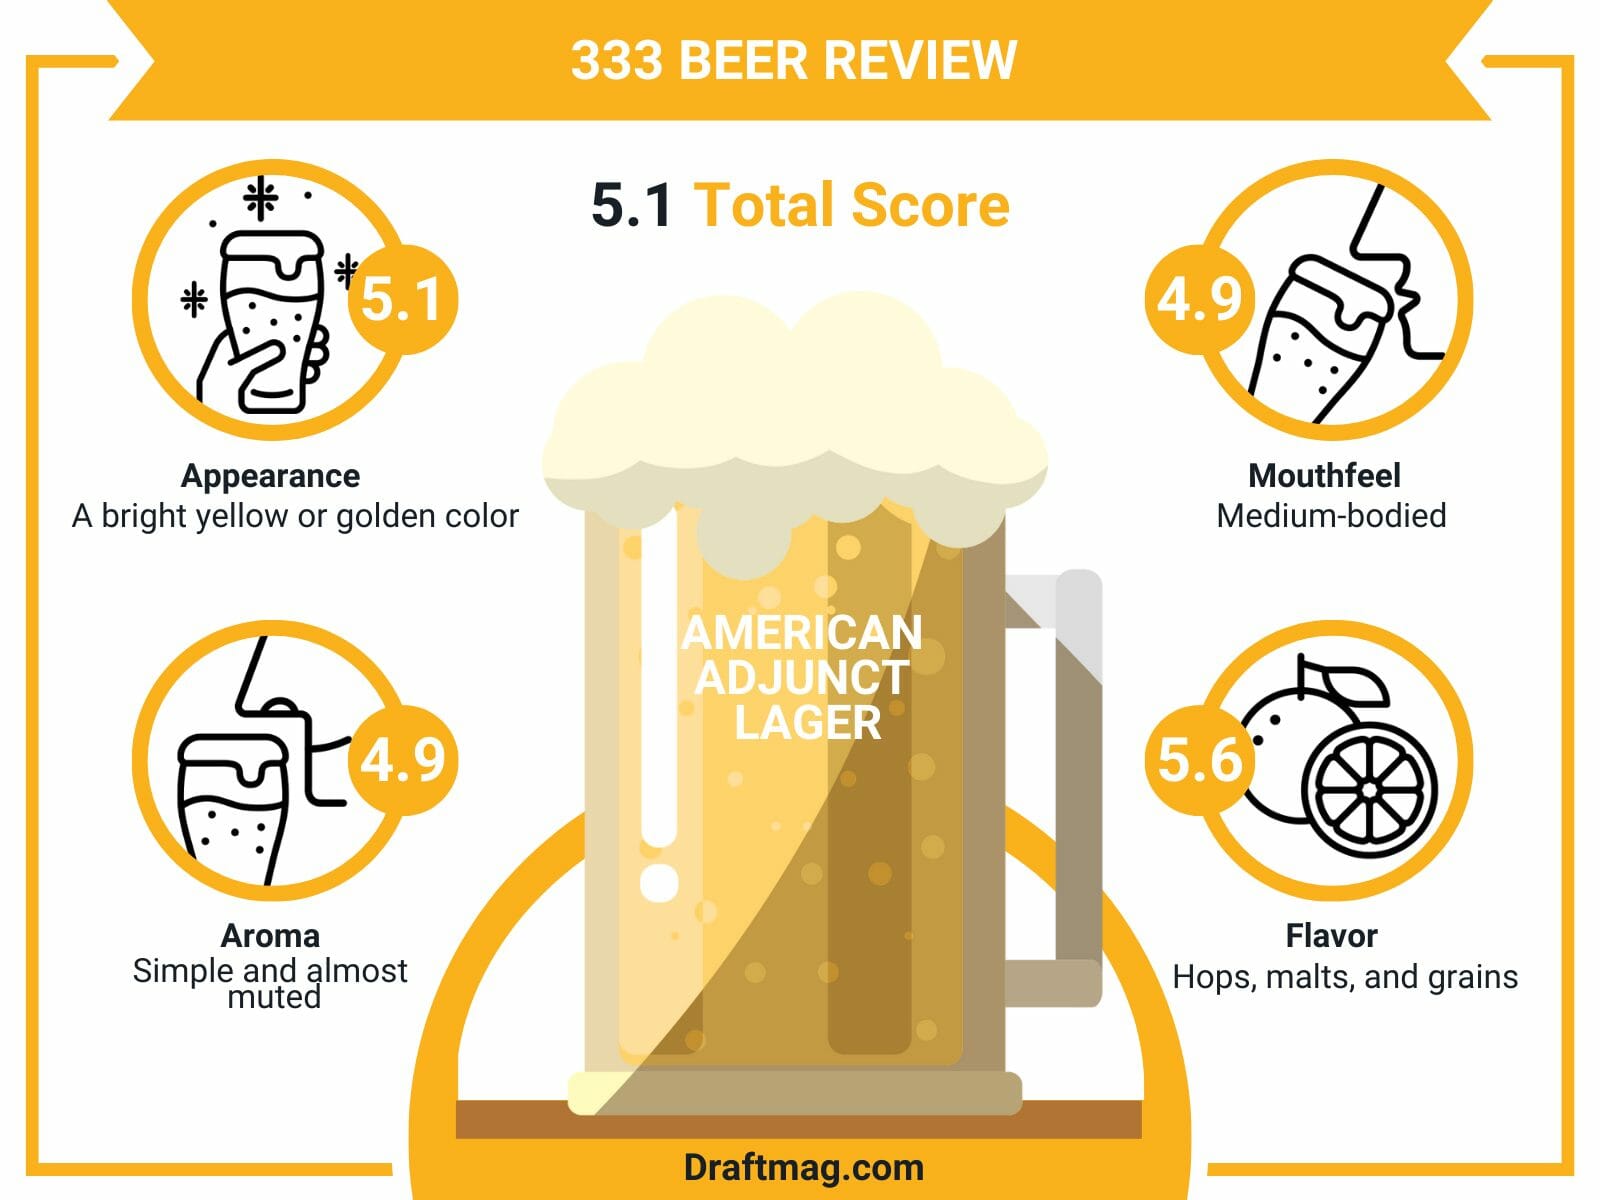 Beer review infographic